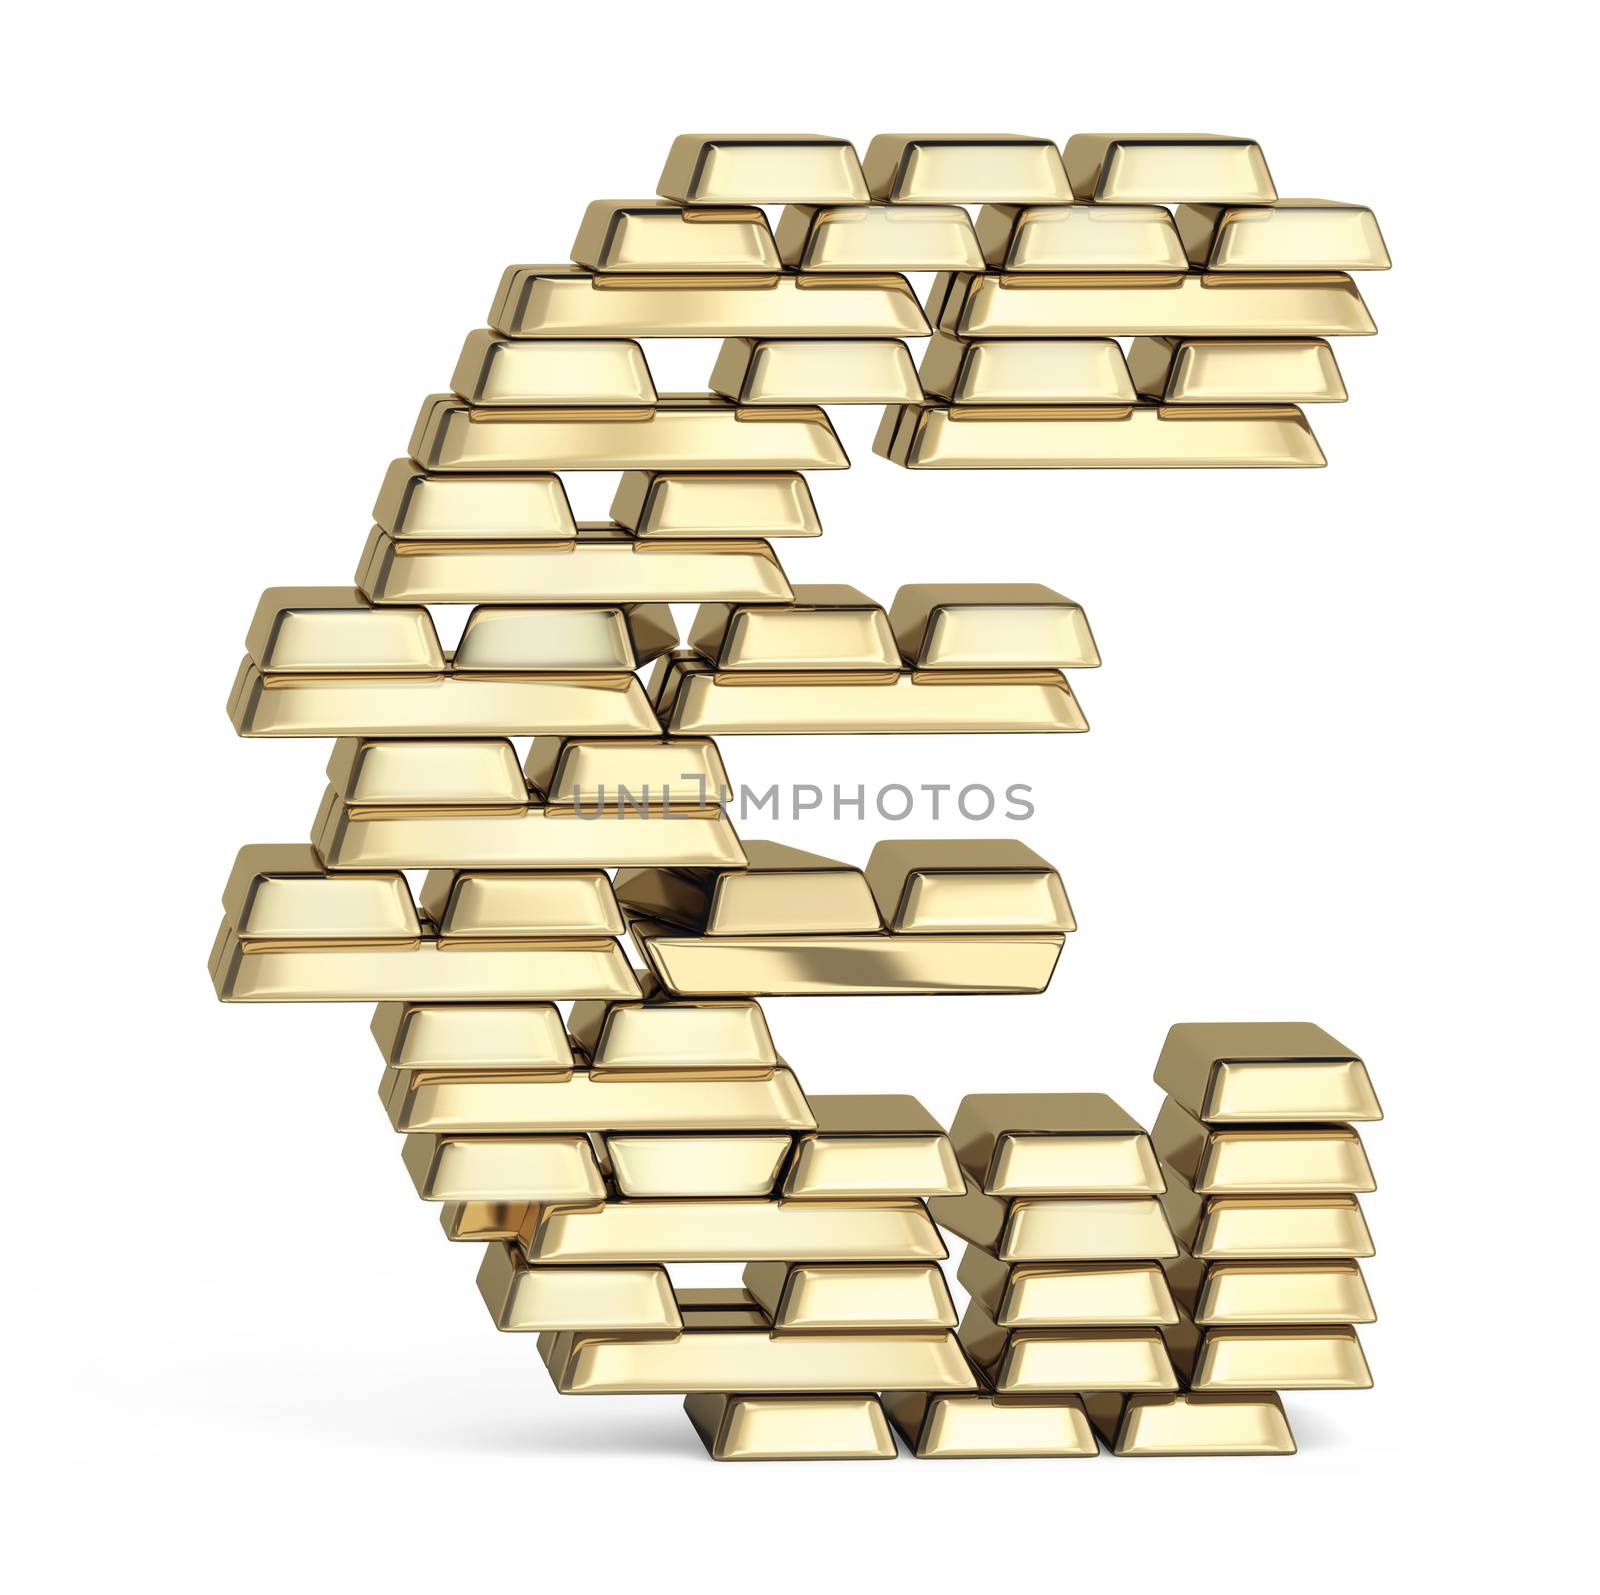 Euro sign from stacked gold bars on white background